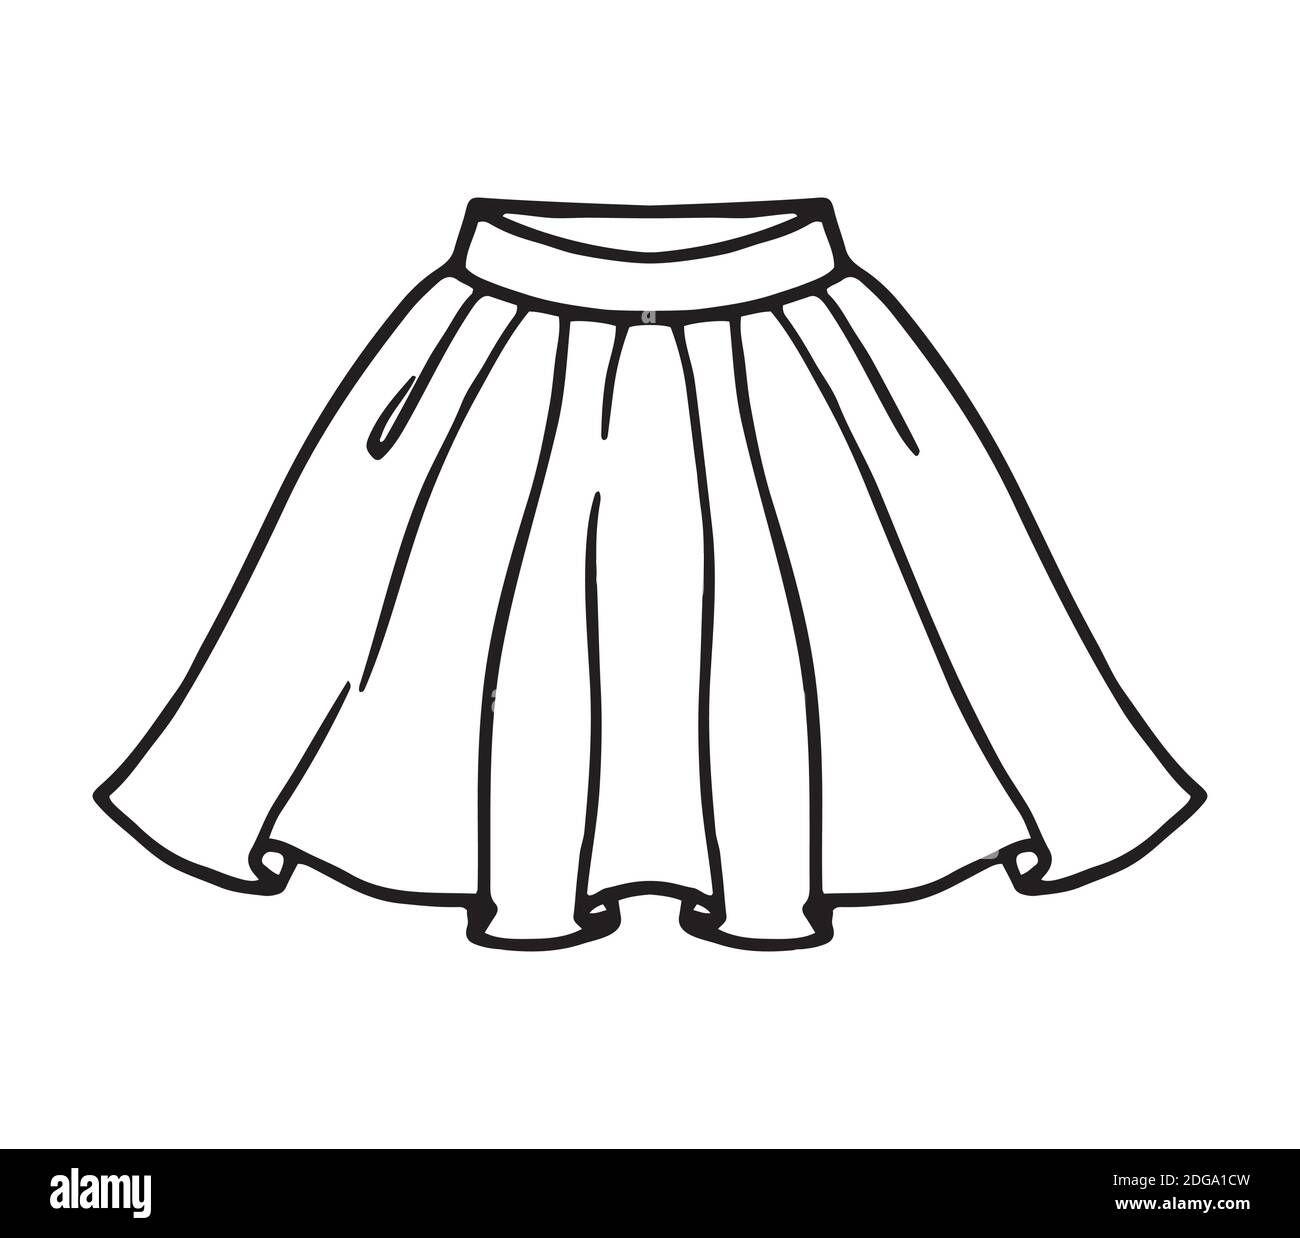 Hand drawn women skirt doodle isolated on white background Stock Vector